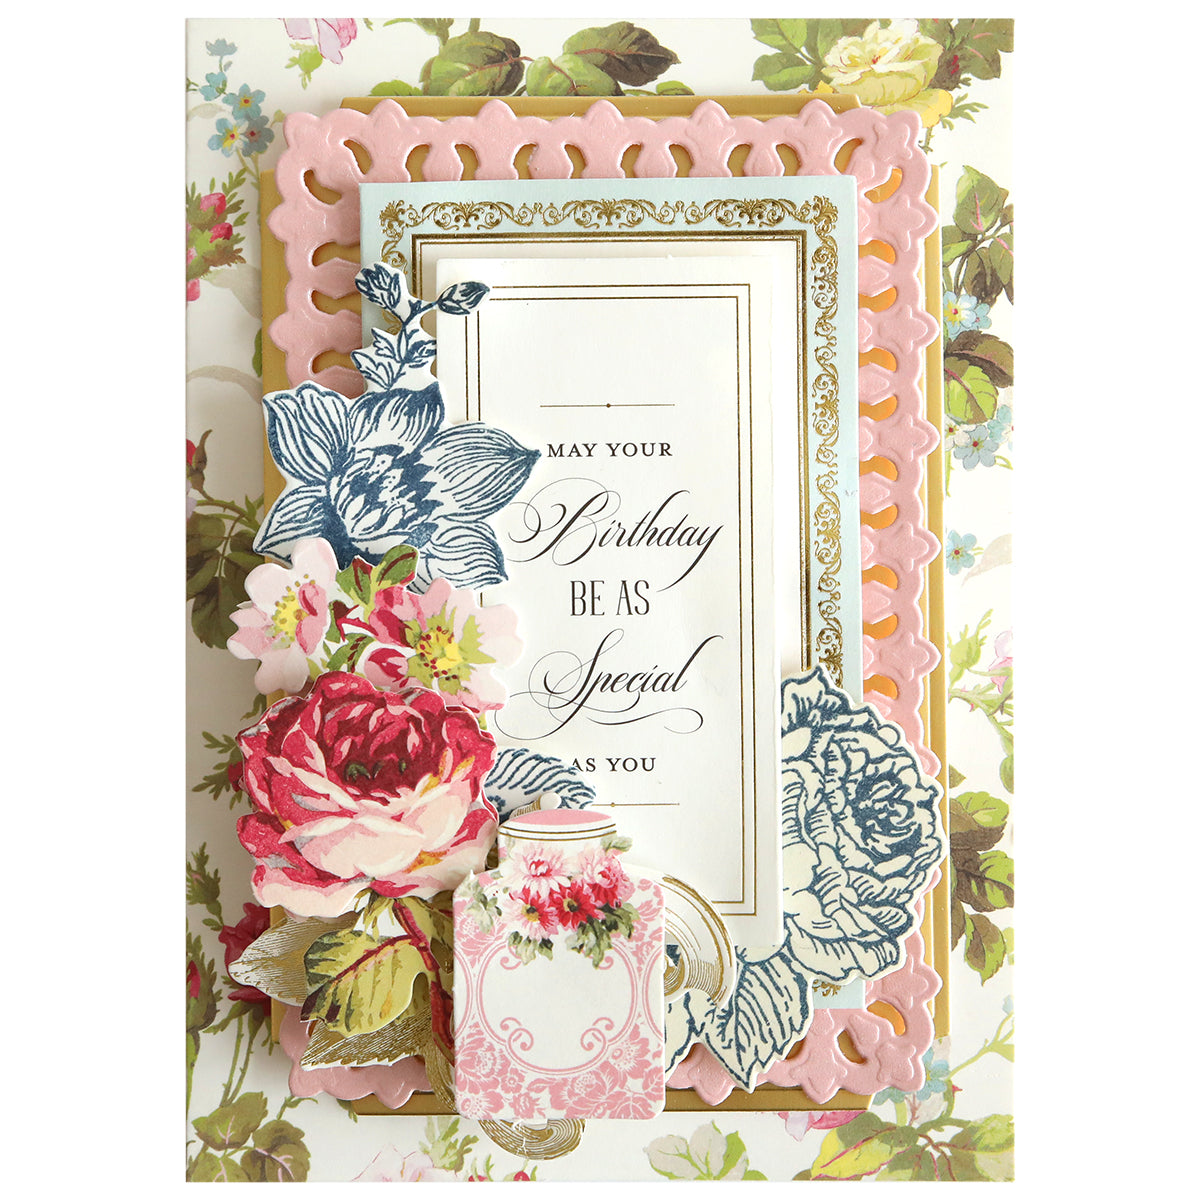 A decorative birthday card embellished with Wildflower Meadow Stamps and Dies and the message "may your birthday be as special.